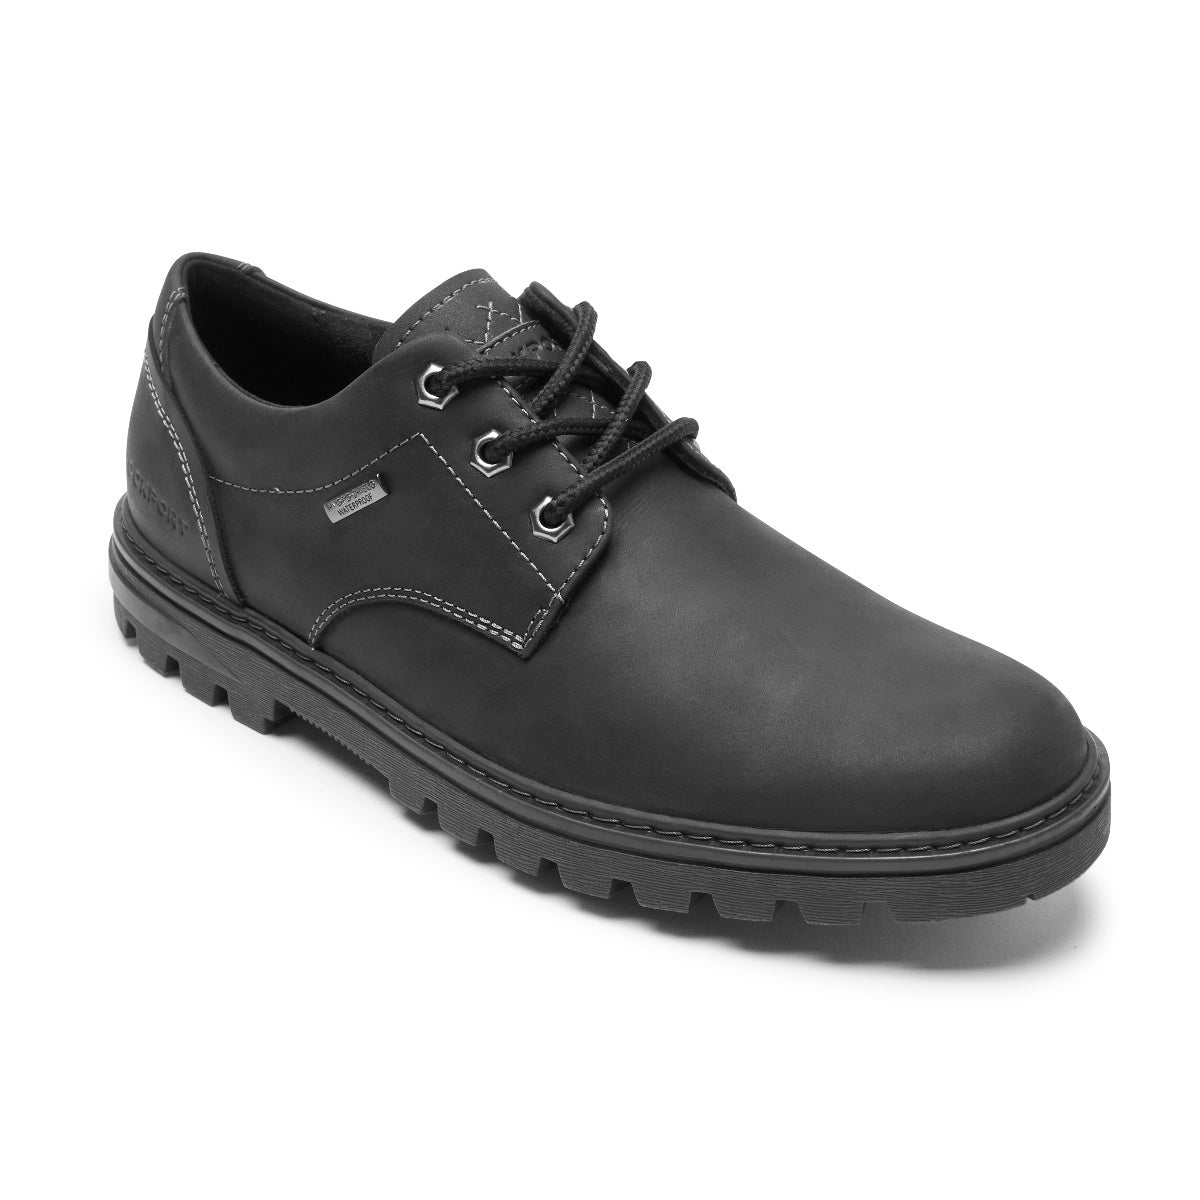 Rockport Mens Weather Or Not Oxford ? Waterproof